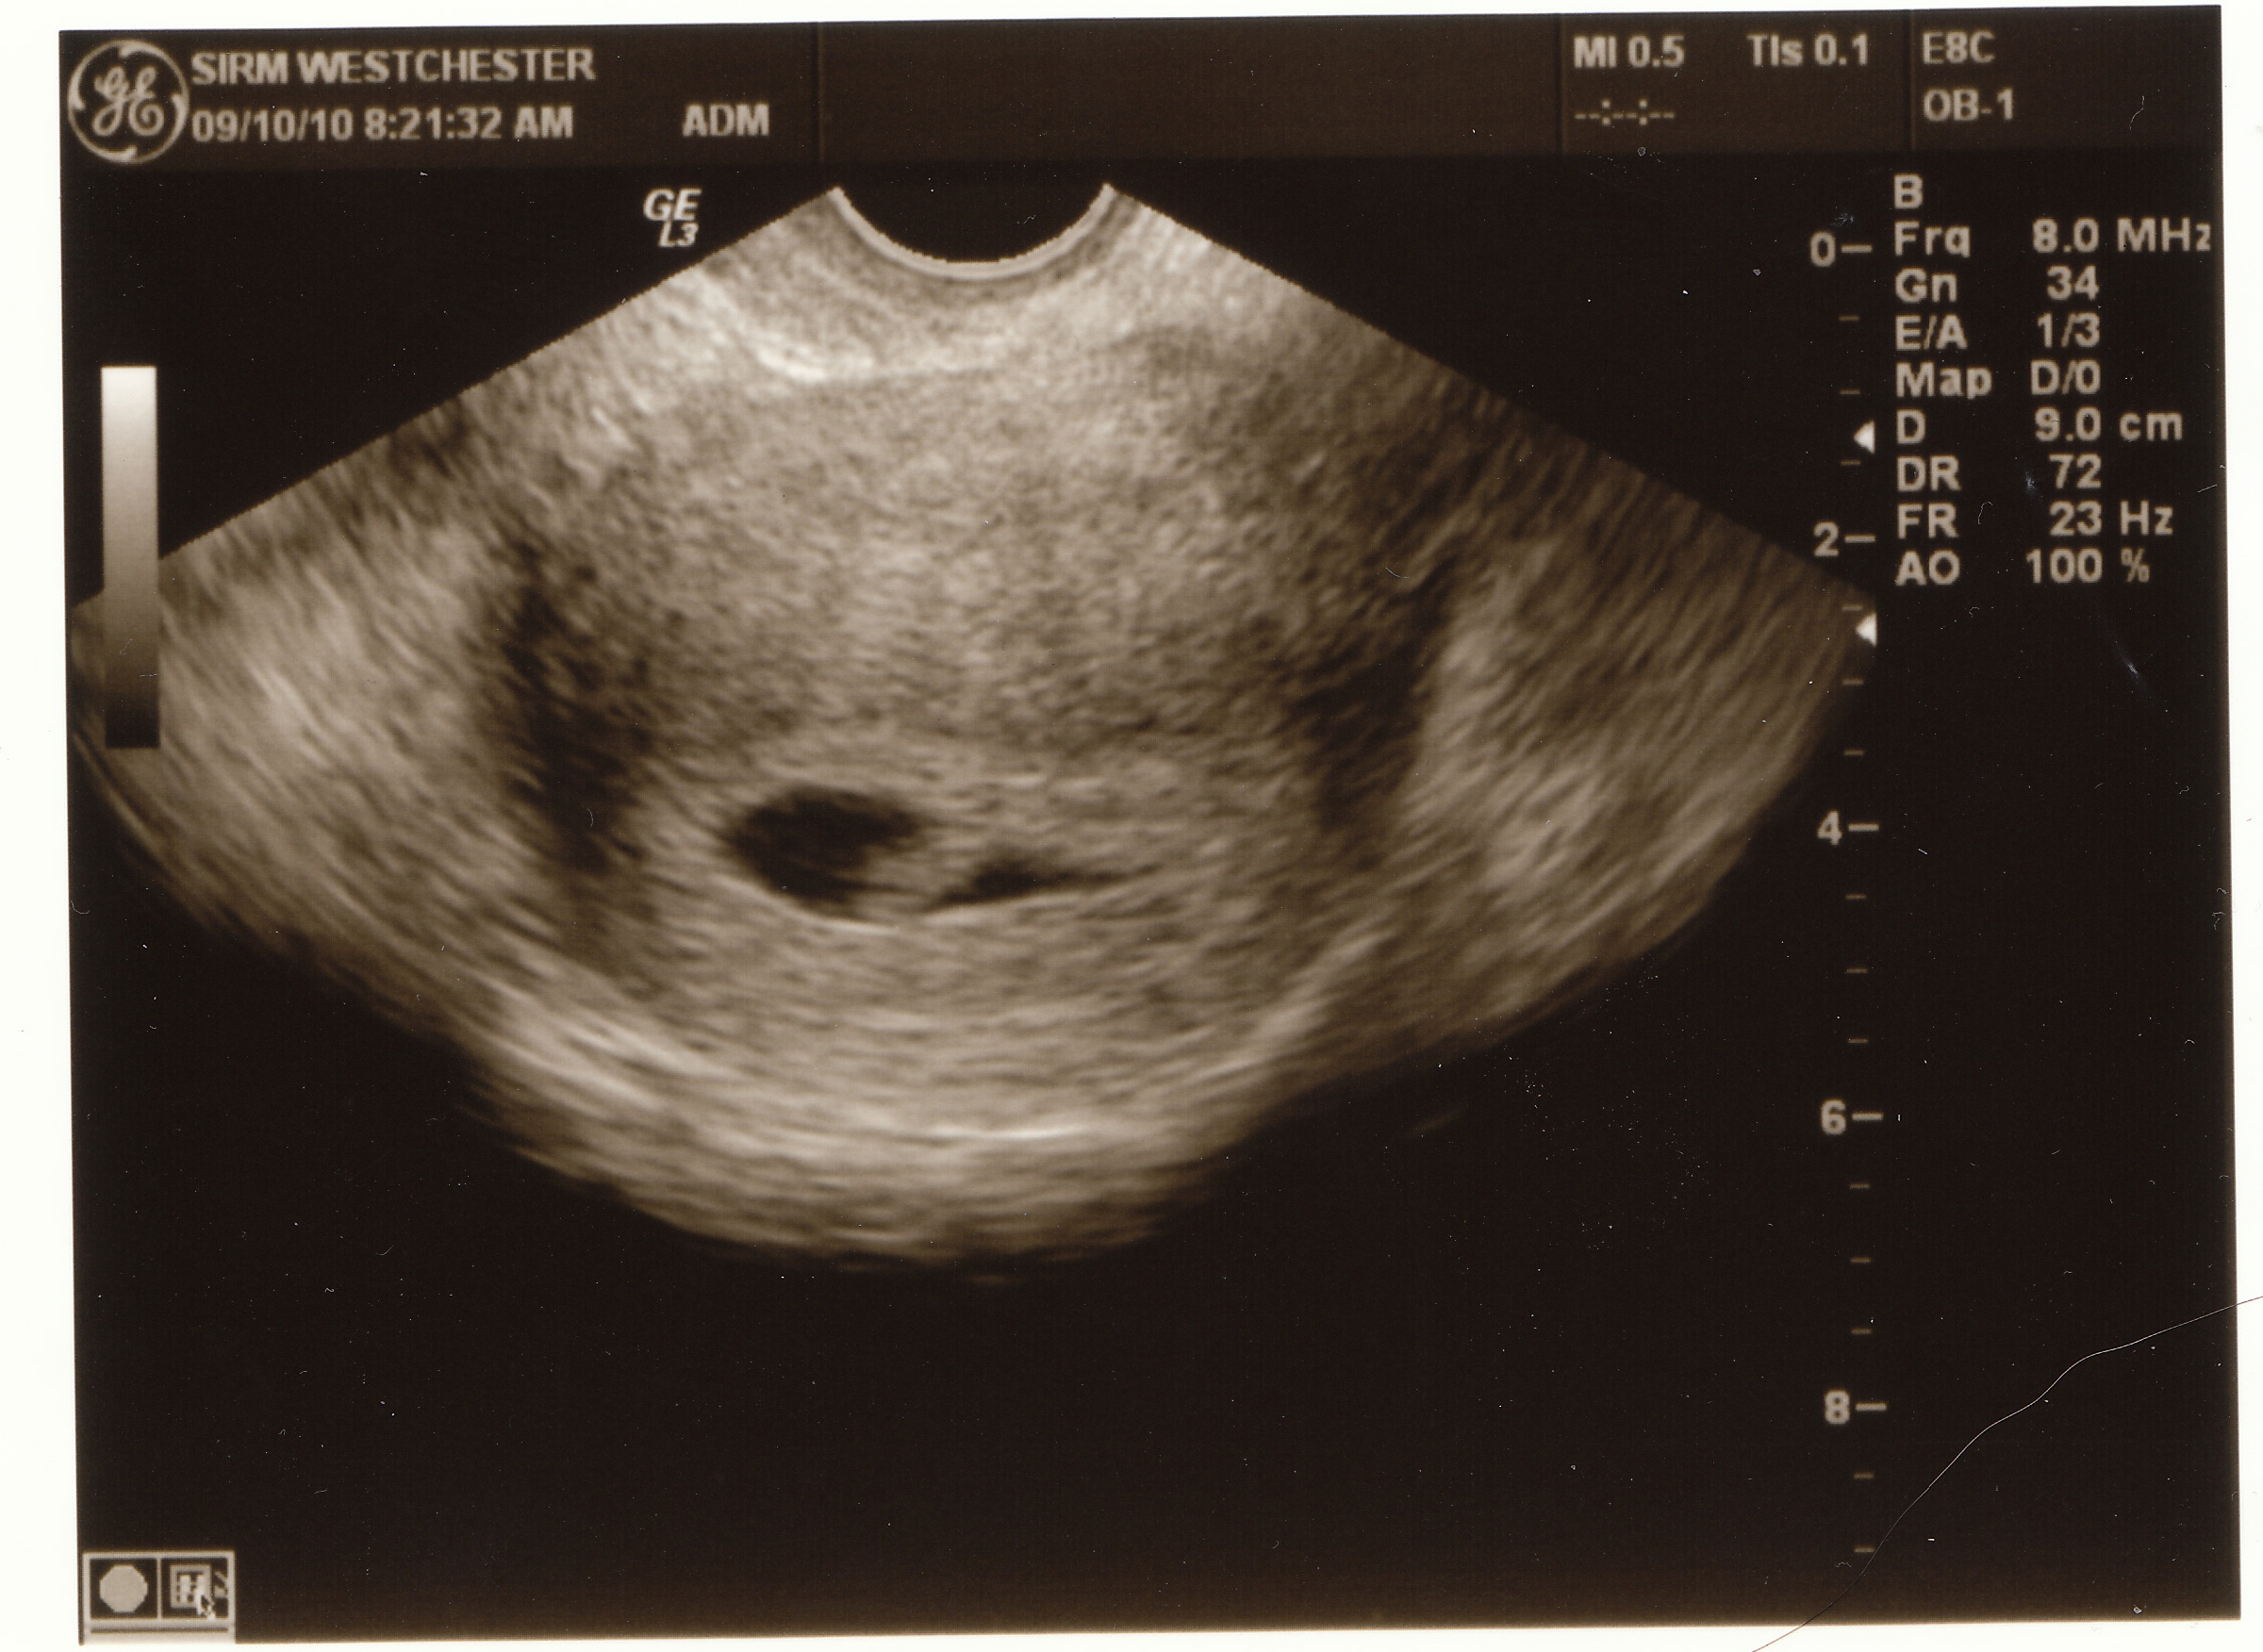 Baby Ultrasound Pictures 2